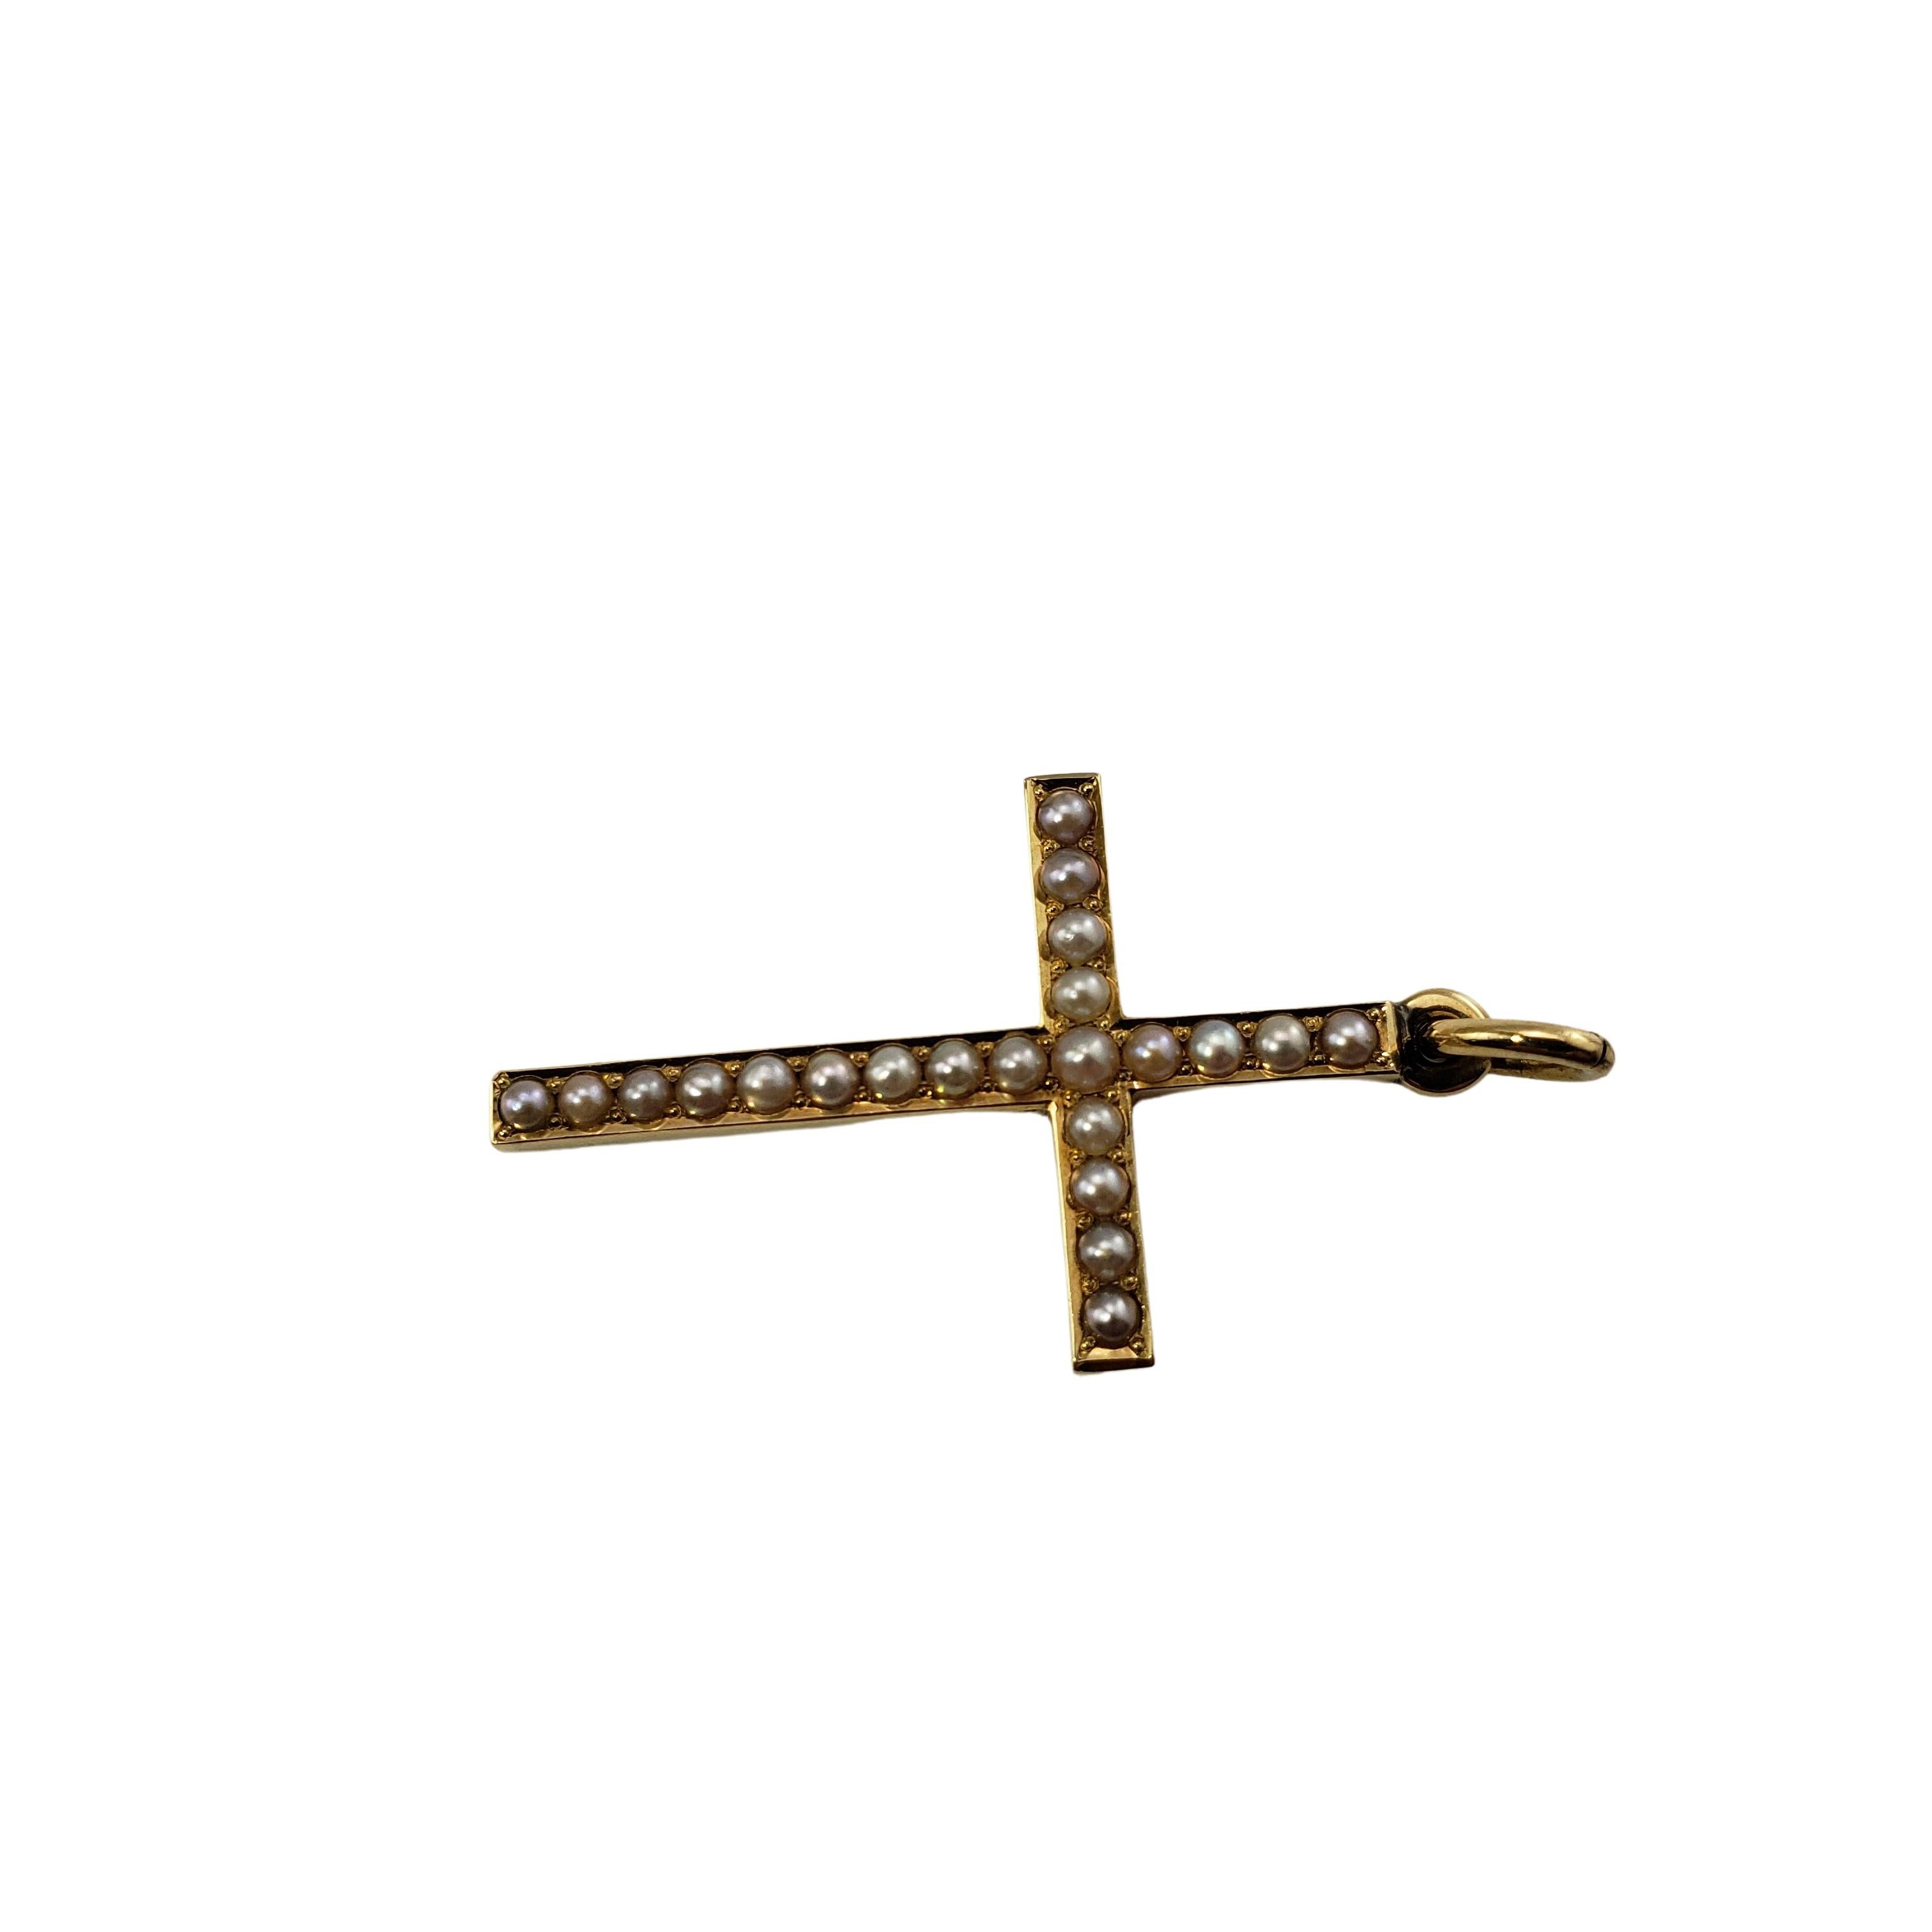 Vintage 14 Karat Yellow Gold and Pearl Cross Pendant-

This lovely cross pendant features 22 seed pearls set in beautifully detailed 14K yellow gold.

Size:  28 mm x 17 mm

Weight:  .9 dwt. /  1.4 gr.

Tested for 14K gold.

*Chain not included

Very